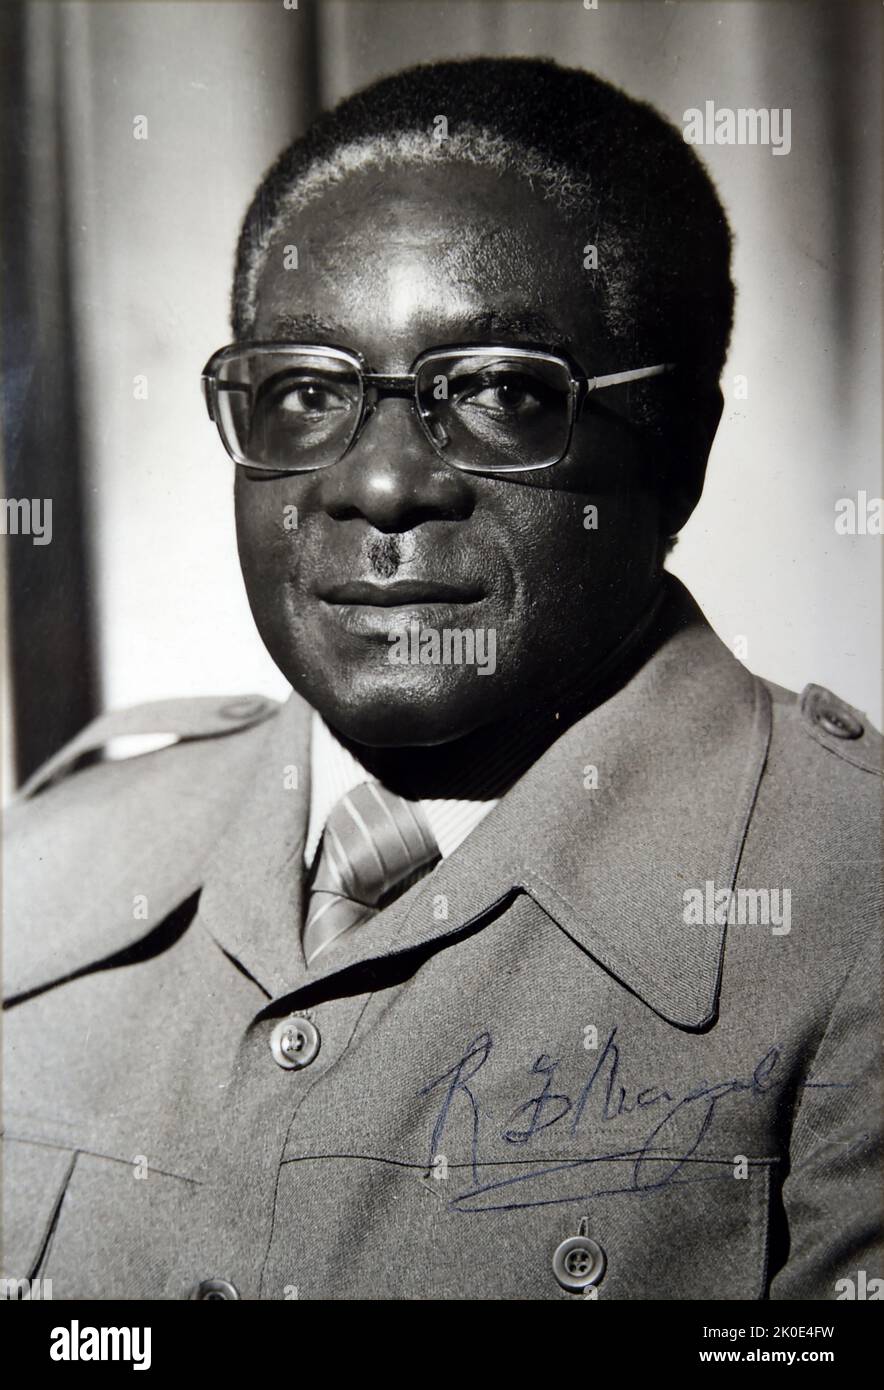 Signed photographs of Robert Mugabe (1924 - 2019) Zimbabwean revolutionary and politician who served as Prime Minister of Zimbabwe from 1980 to 1987 and then as President from 1987 to 2017. Stock Photo